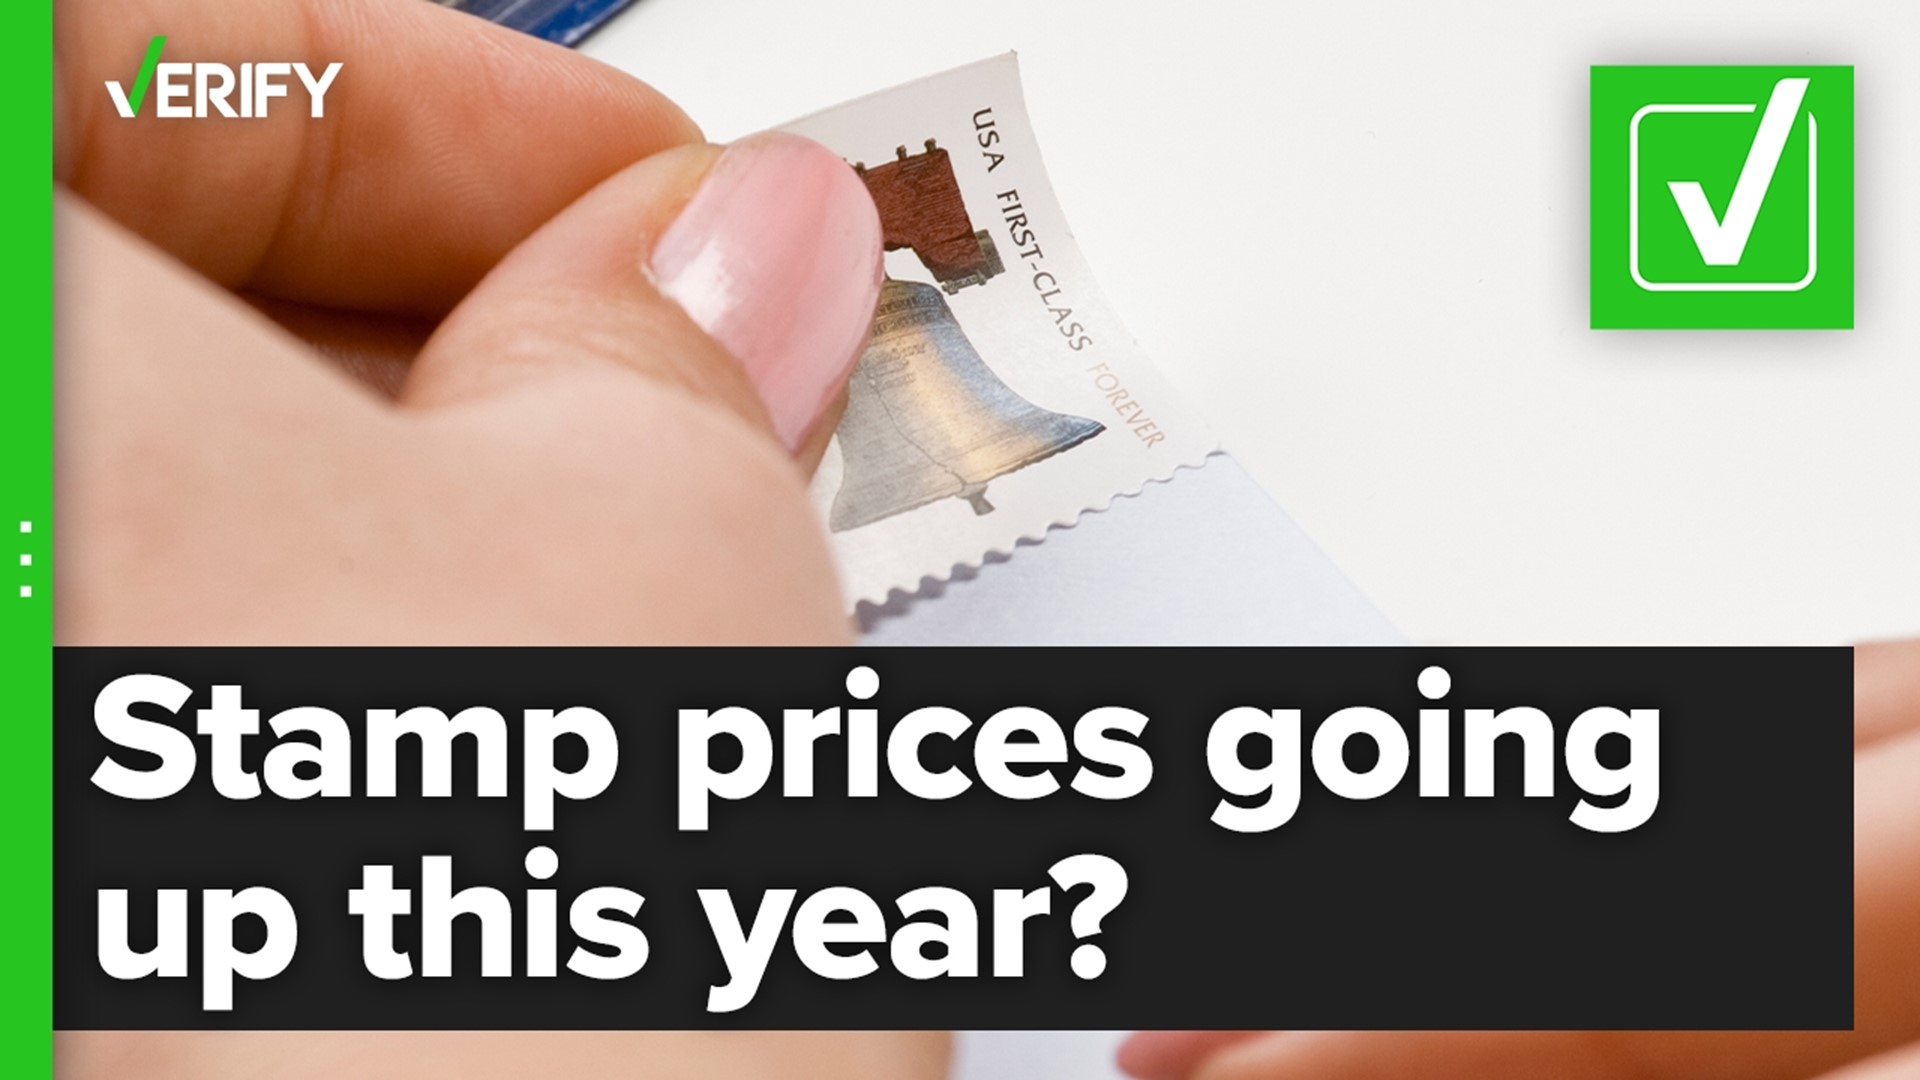 Starting on Jan. 22, 2023, the price of Forever stamps will increase from 60 cents to 63 cents to offset the rise in inflation, according to USPS.